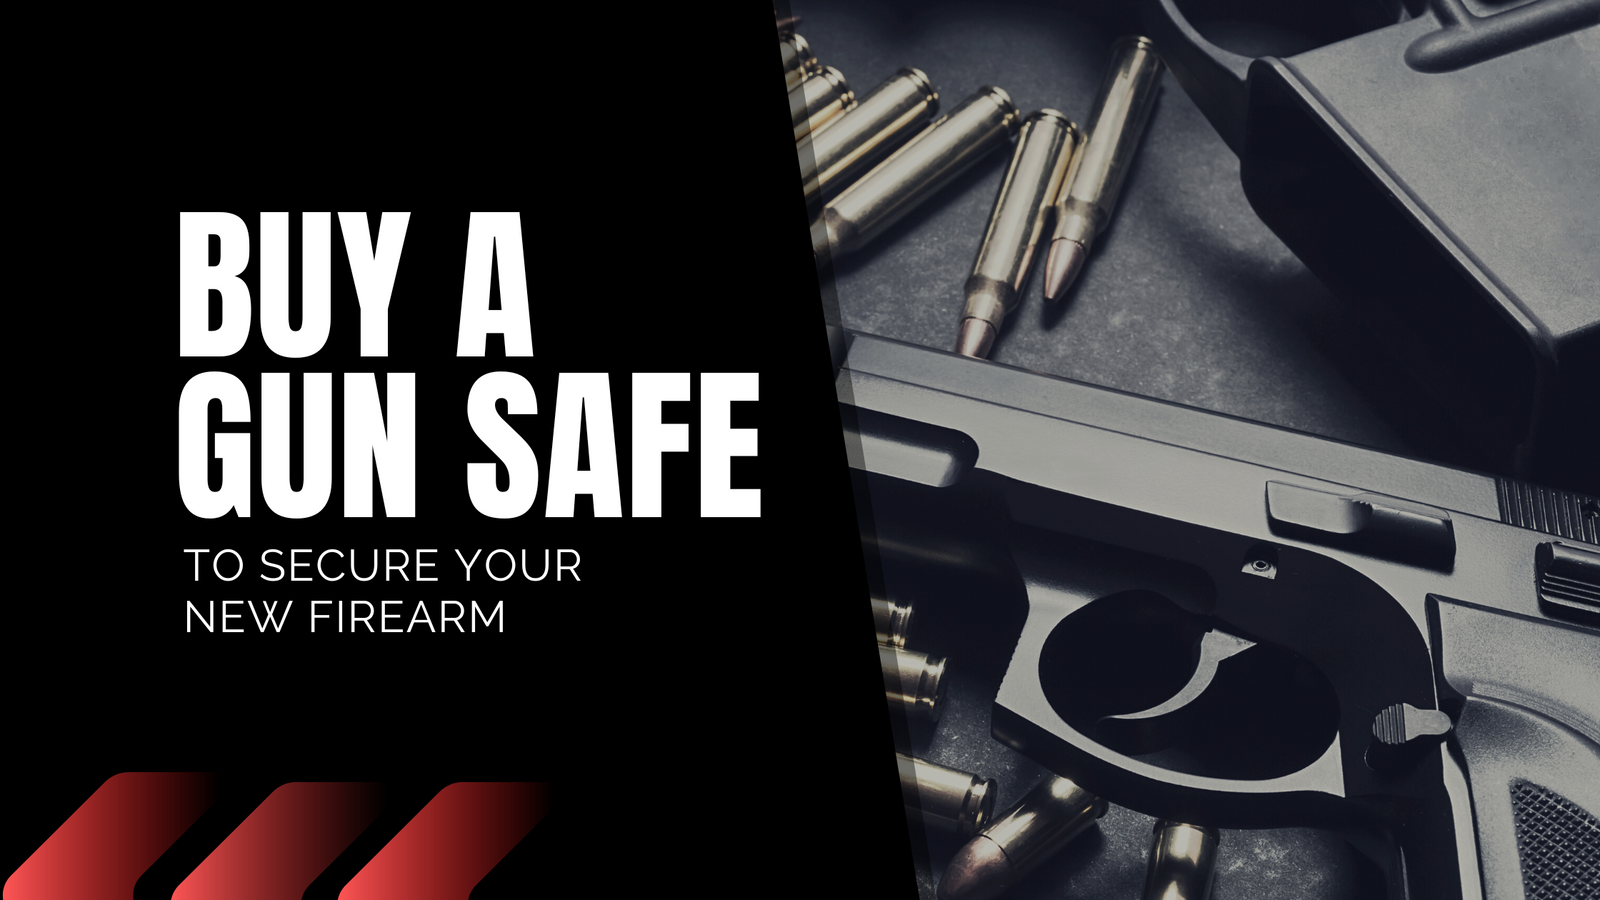 Buying the right gun safe can be challenging when you're not sure where to start. To help you out, we've compiled the top four most frequently asked questions about gun safes and answered them